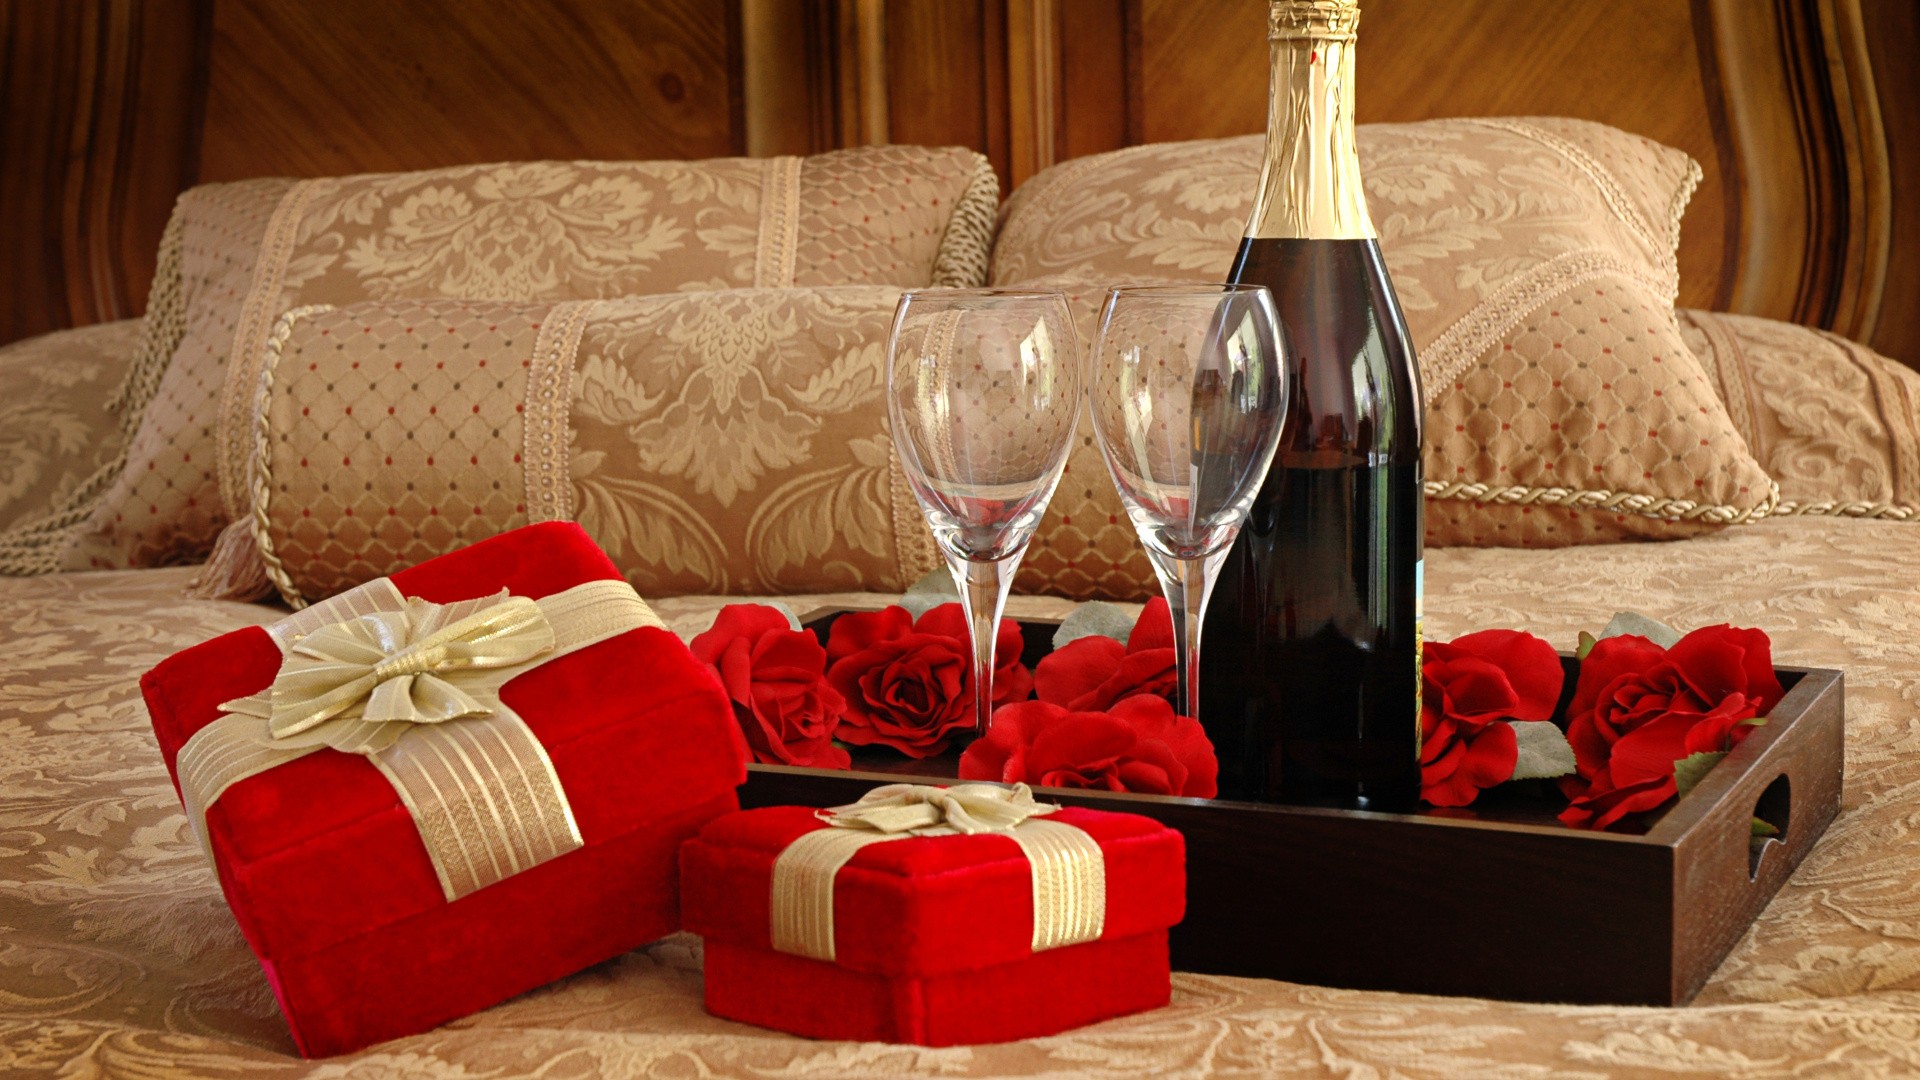 Best Gifts For Valentines Day: Vday Gifts For Her